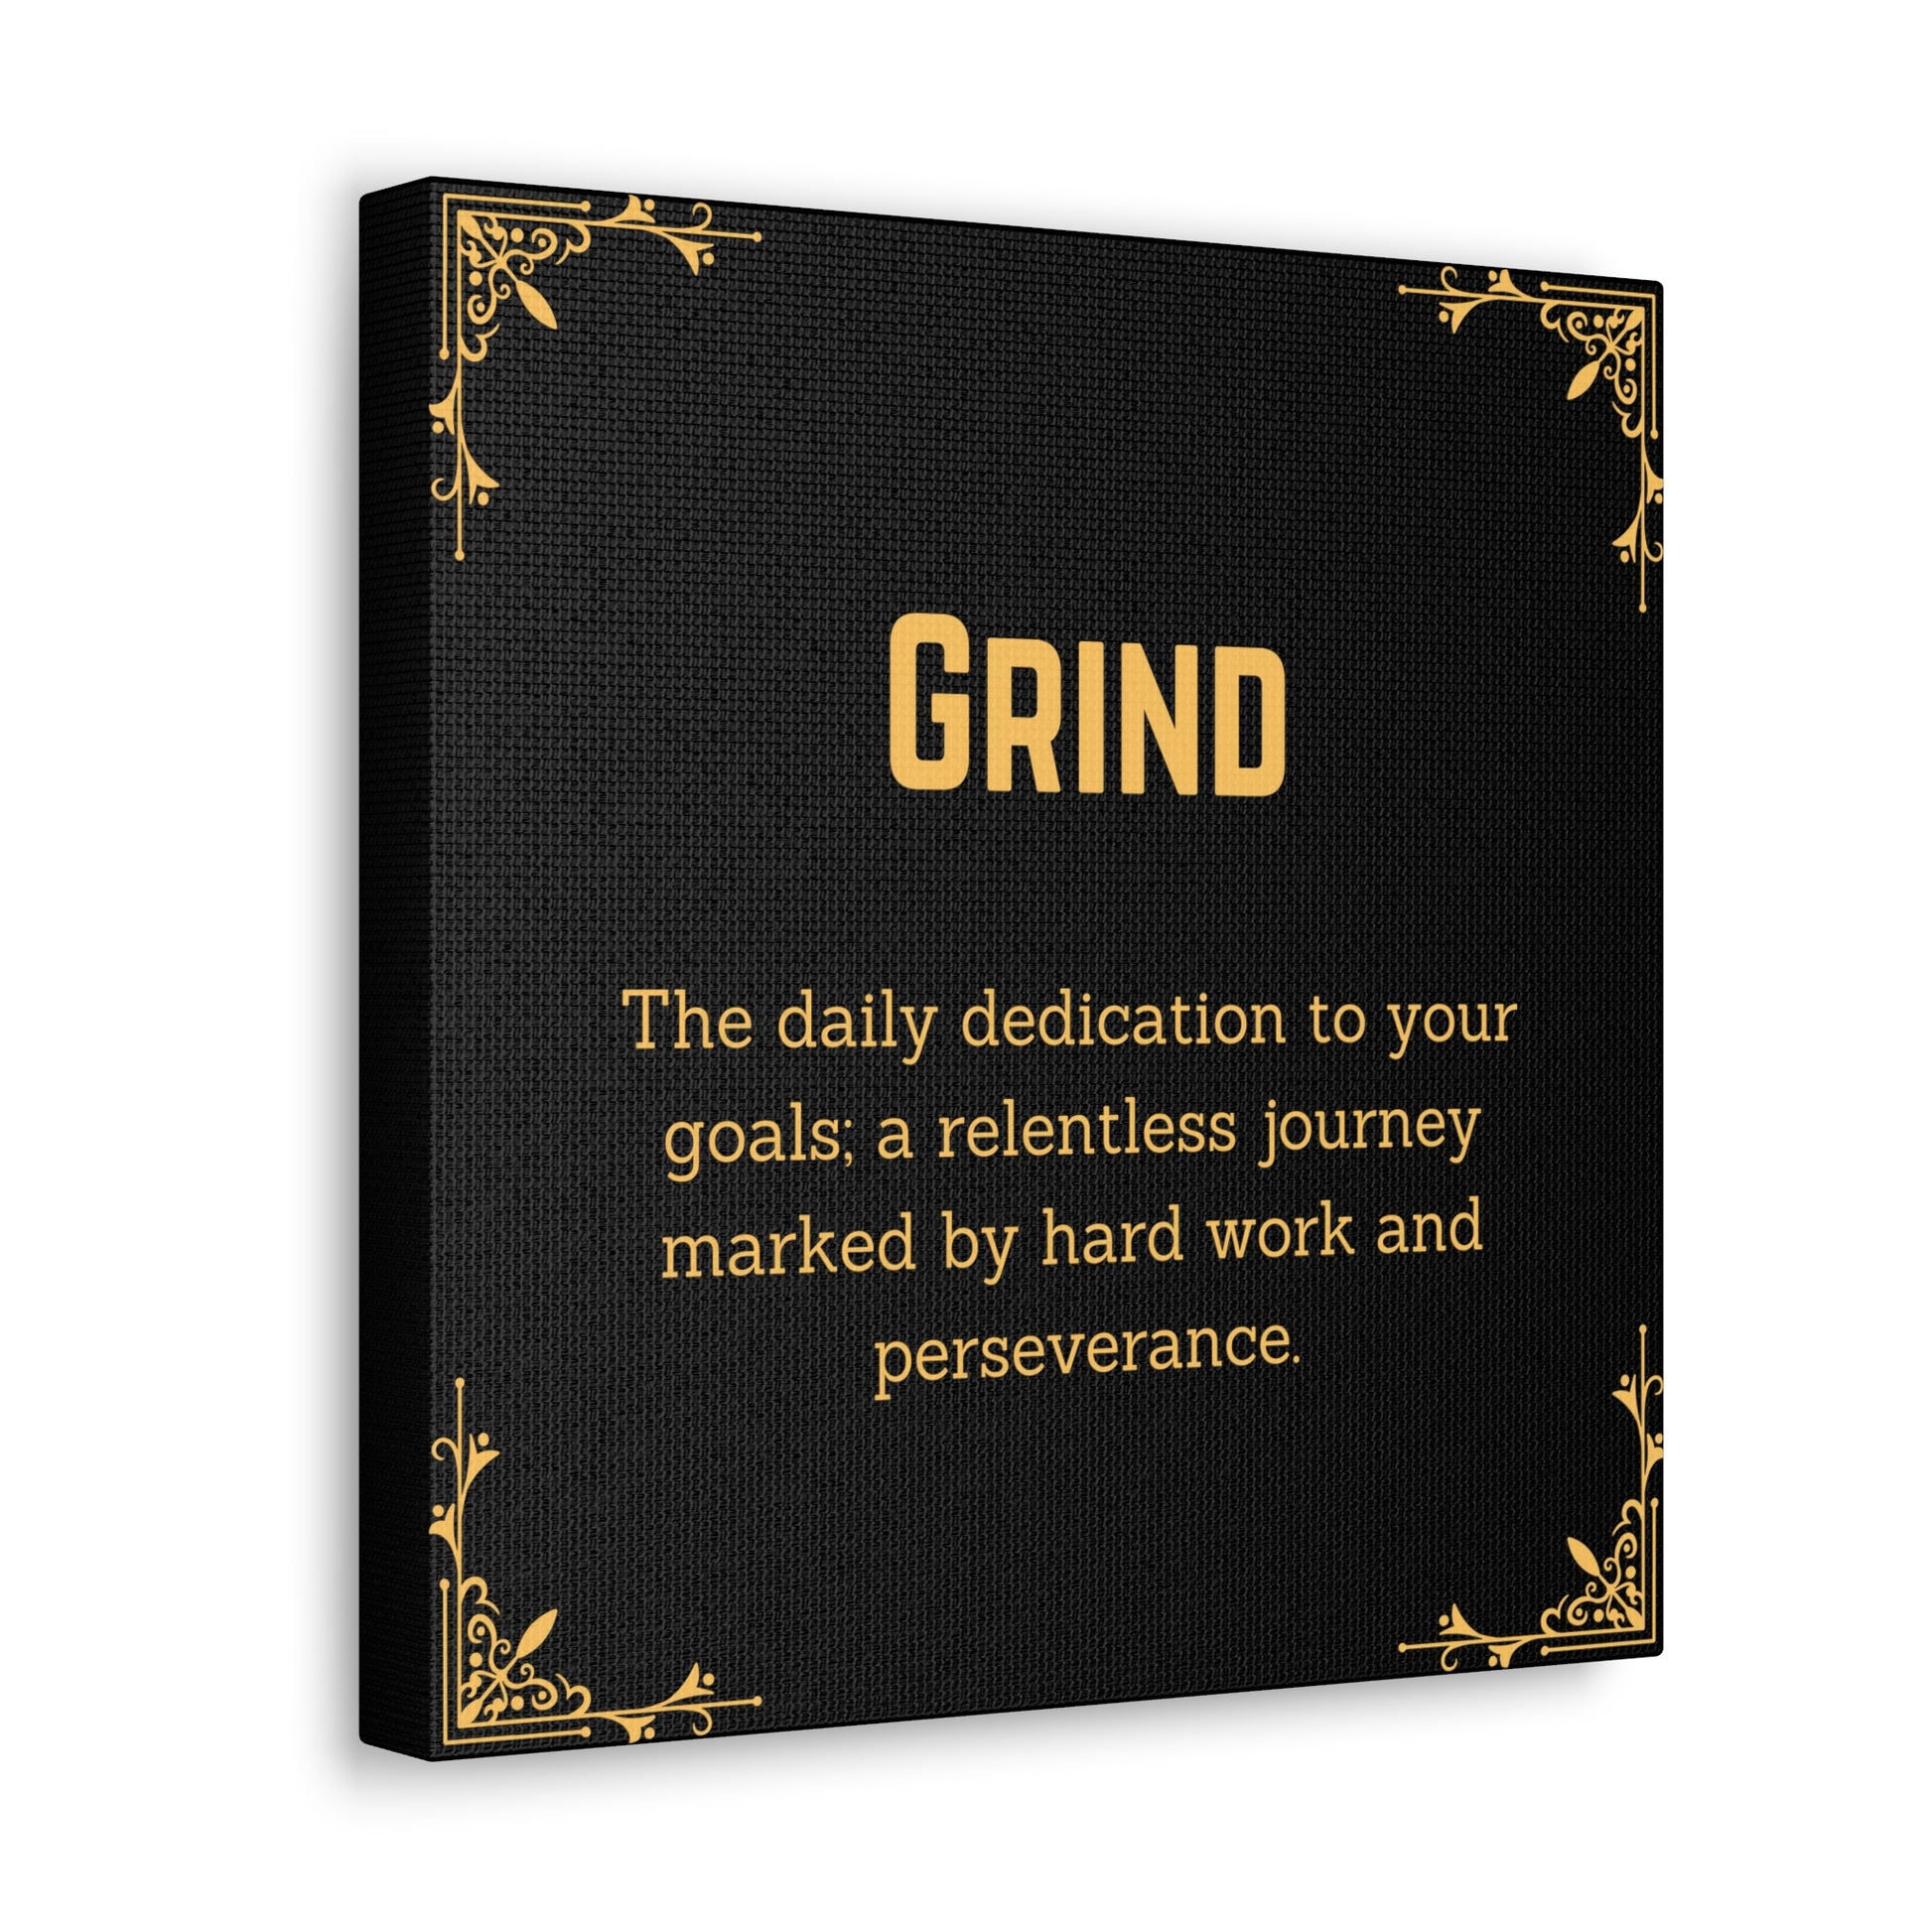 "Grind" Wall Art - Weave Got Gifts - Unique Gifts You Won’t Find Anywhere Else!